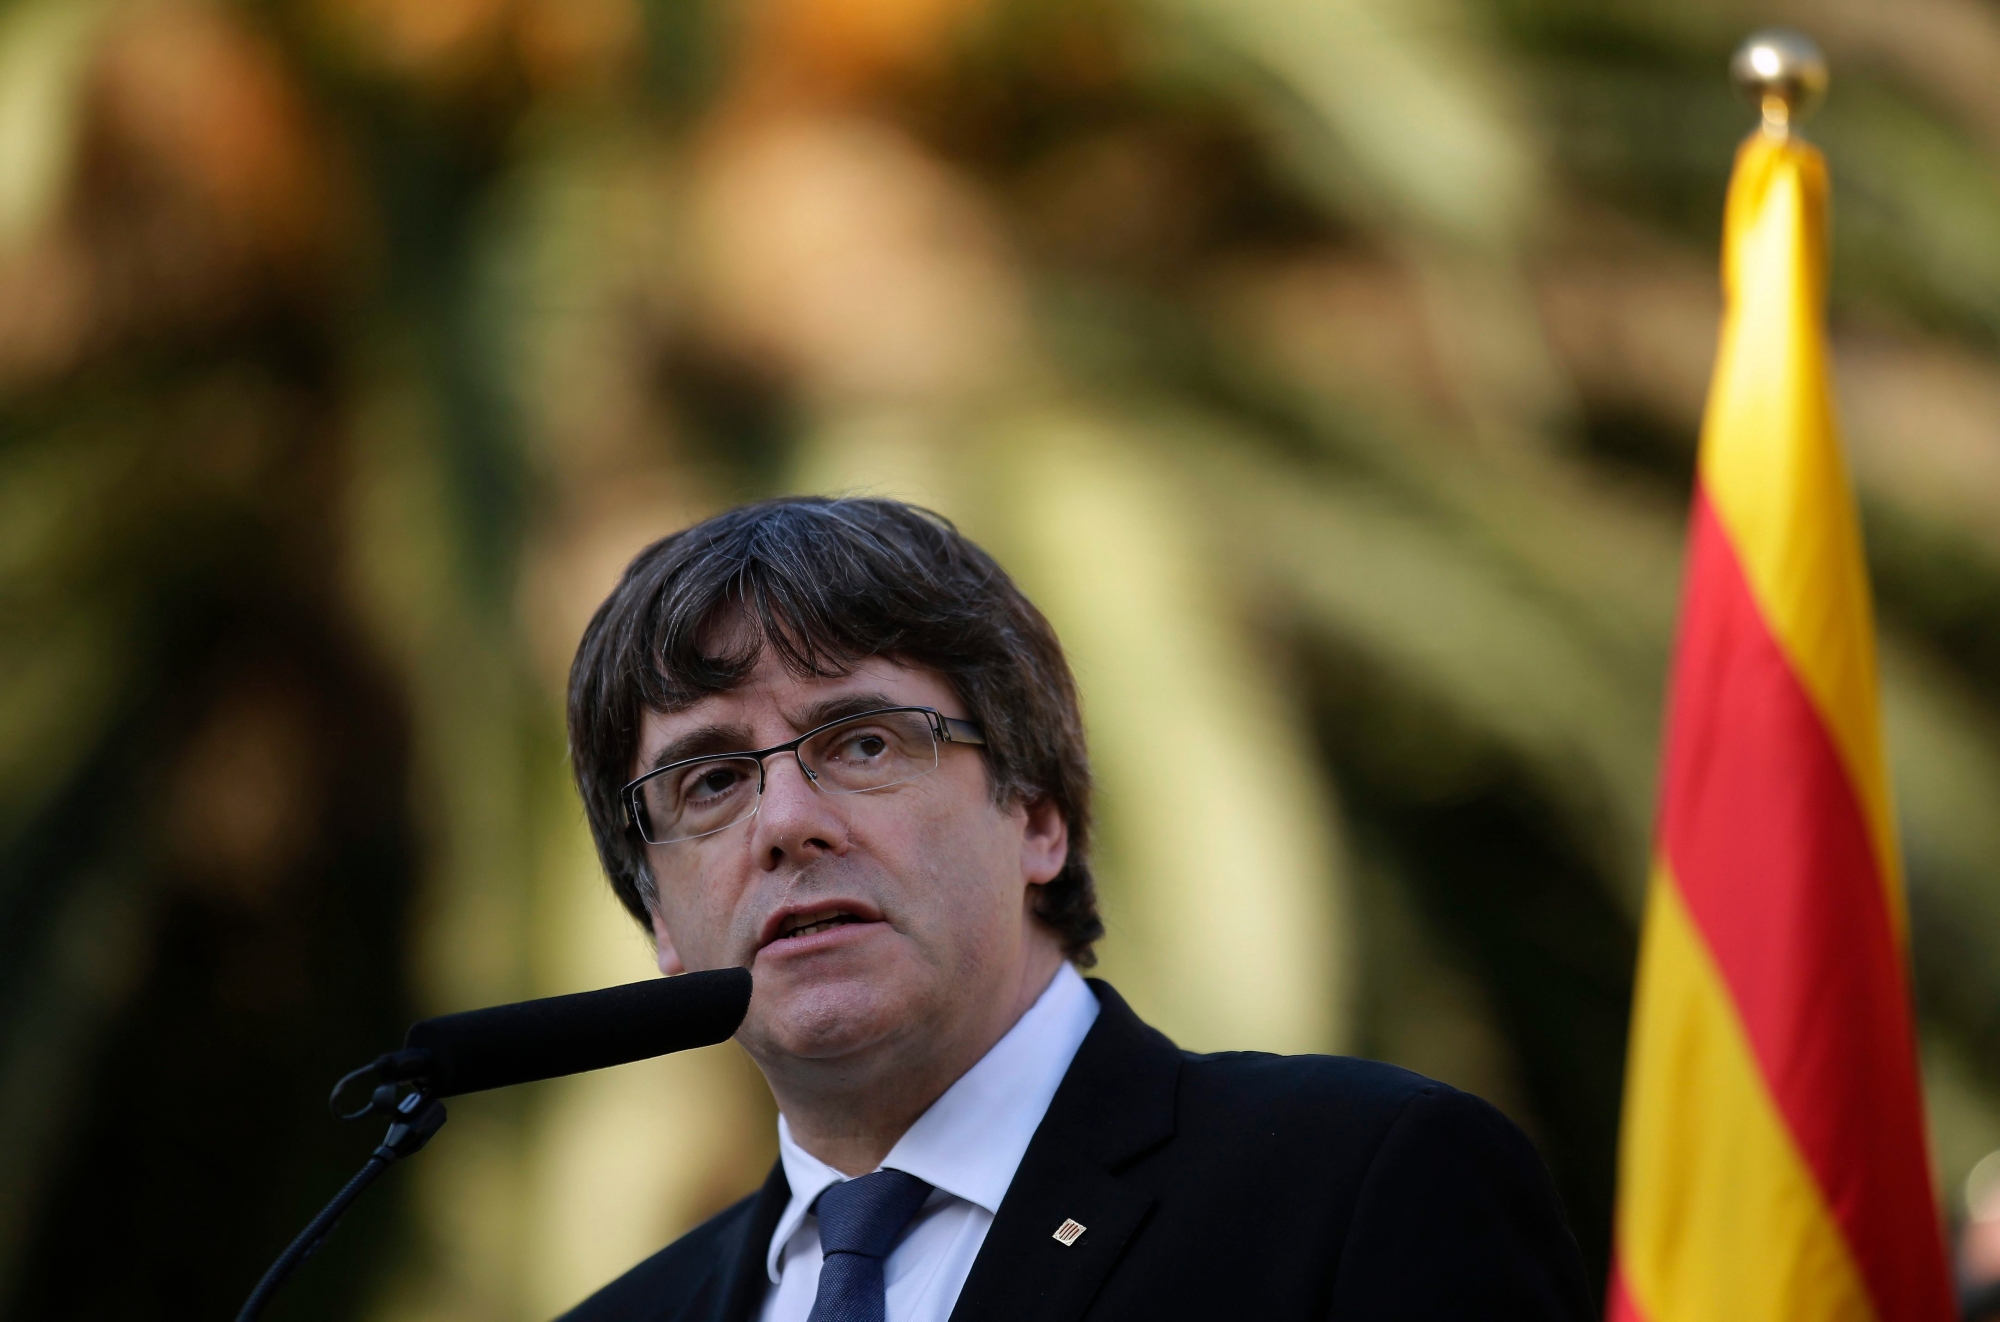 Catalan regional President Carles Puigdemont addresses to the media after a ceremony commemorating the 77th anniversary of the death of Catalan leader Lluis Companys at the Montjuic Cemetery in Barcelona, Spain, Sunday, Oct. 15, 2017. Catalonia's president is facing a critical decision that could determine the course of the region's secessionist movement to break away from Spain. The Spanish government has given Carles Puigdemont until Monday morning to clarify if he did or didn't actually declare independence earlier this week.(AP Photo/Manu Fernandez) Spain Catalonia